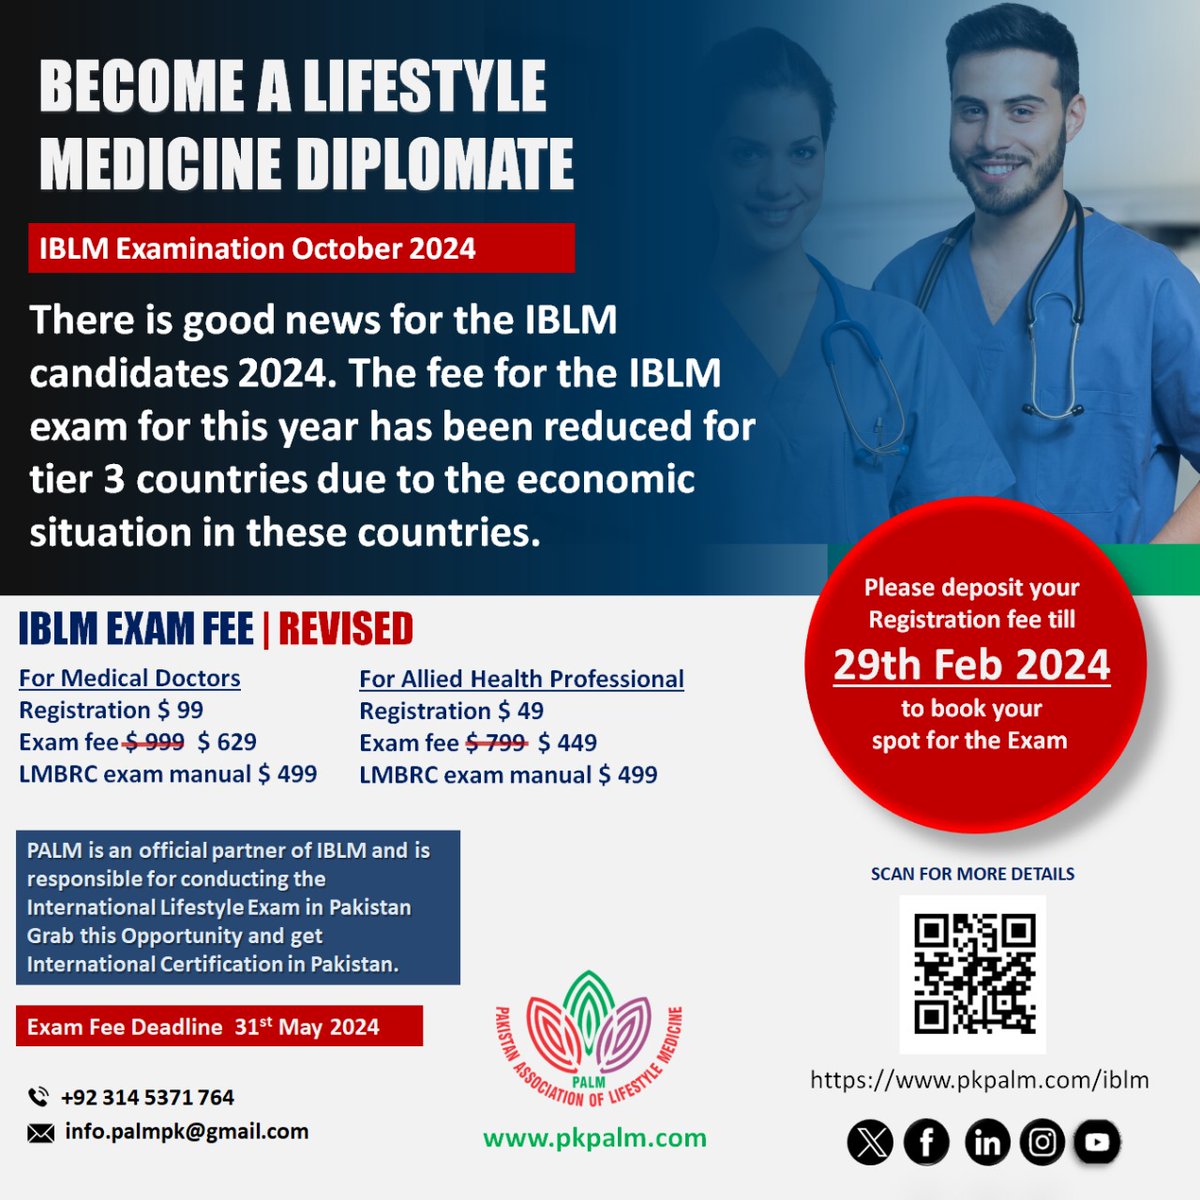 Become a Lifestyle Medicine Diplomate. Great opportunity for Medical Doctors and Allied Health Professionals. For more details please visit pkpalm.com/iblm. Deposit your registration fee till 29th Feb to book your spot for the Exam.